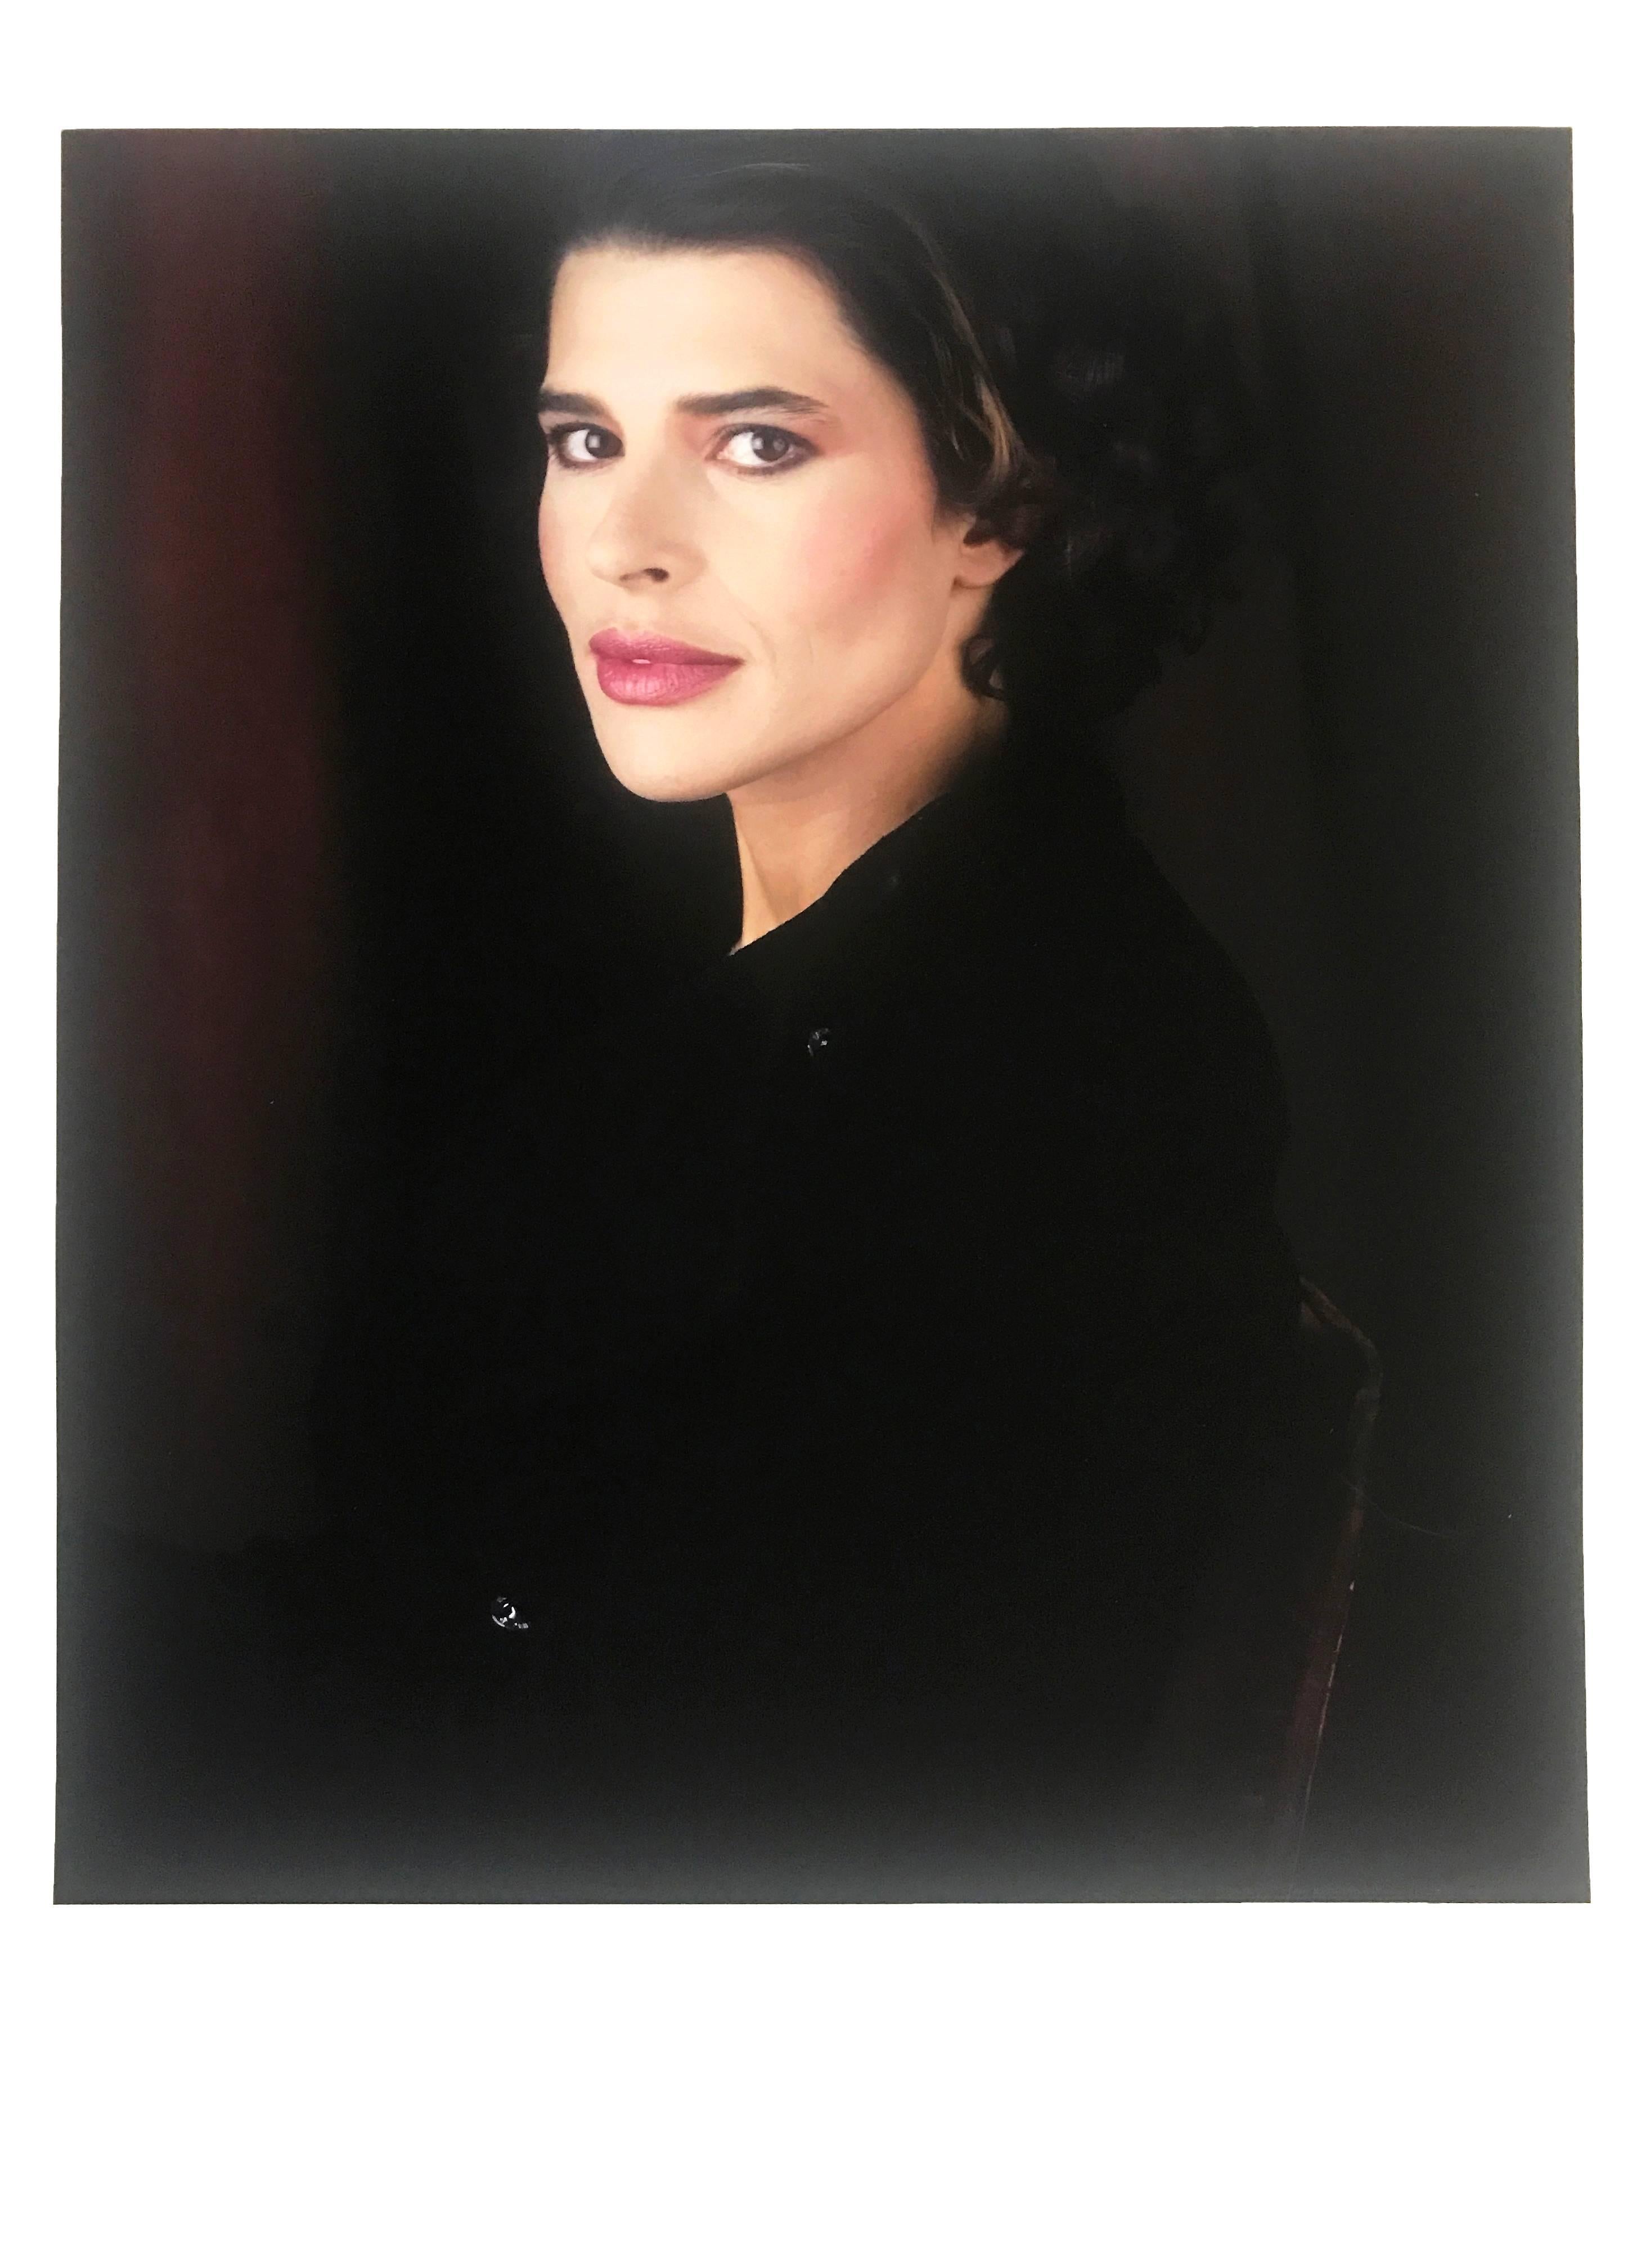 Fanny Ardant, Paris, France, Contemporary Portrait Photography of French Actress